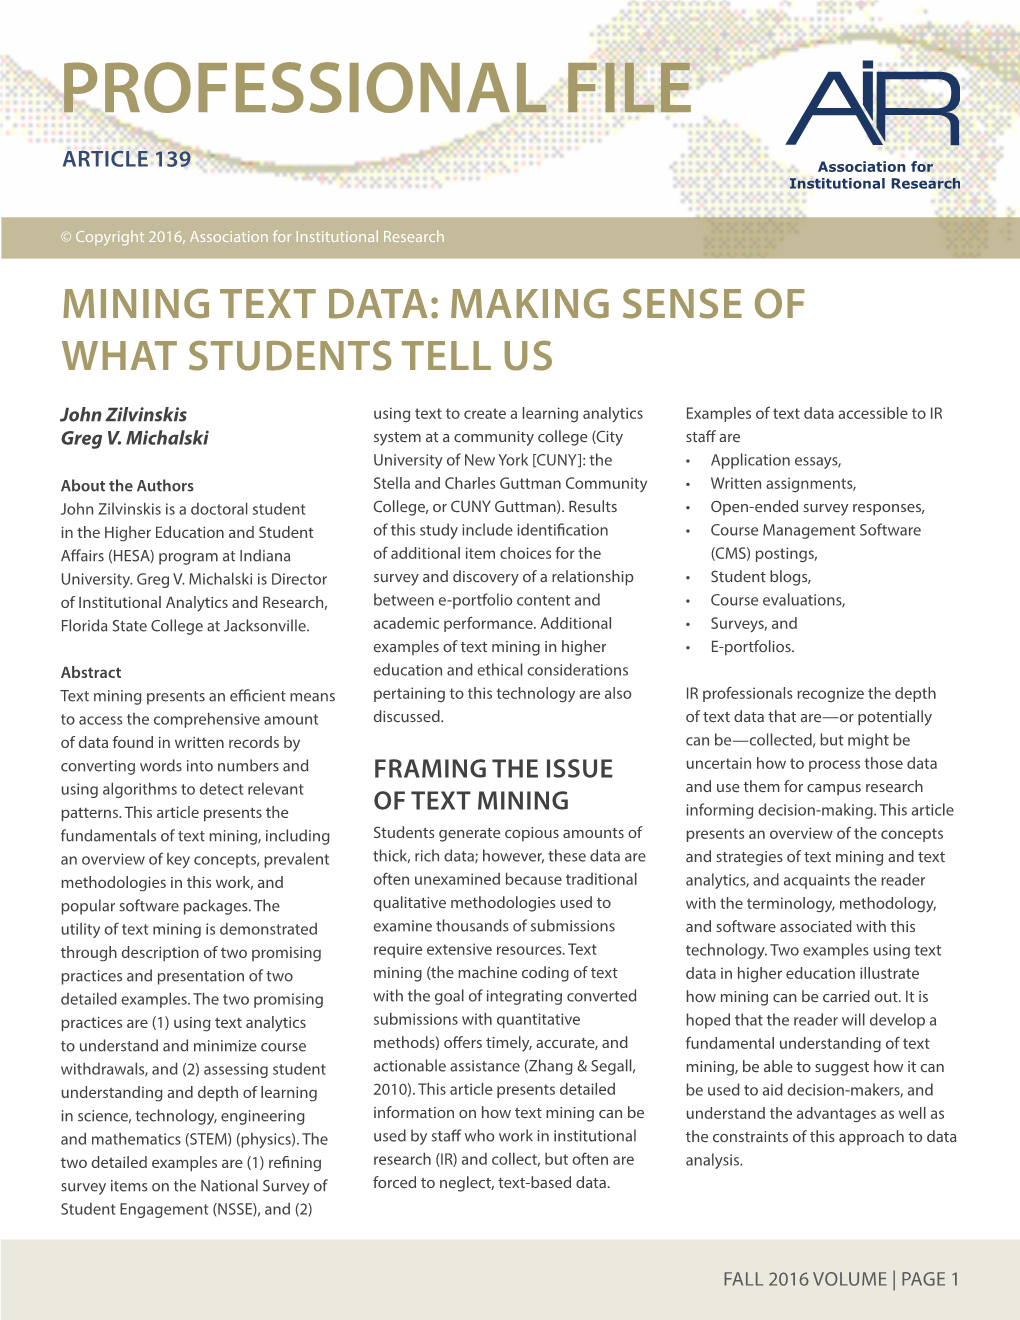 Mining Text Data: Making Sense of What Students Tell Us